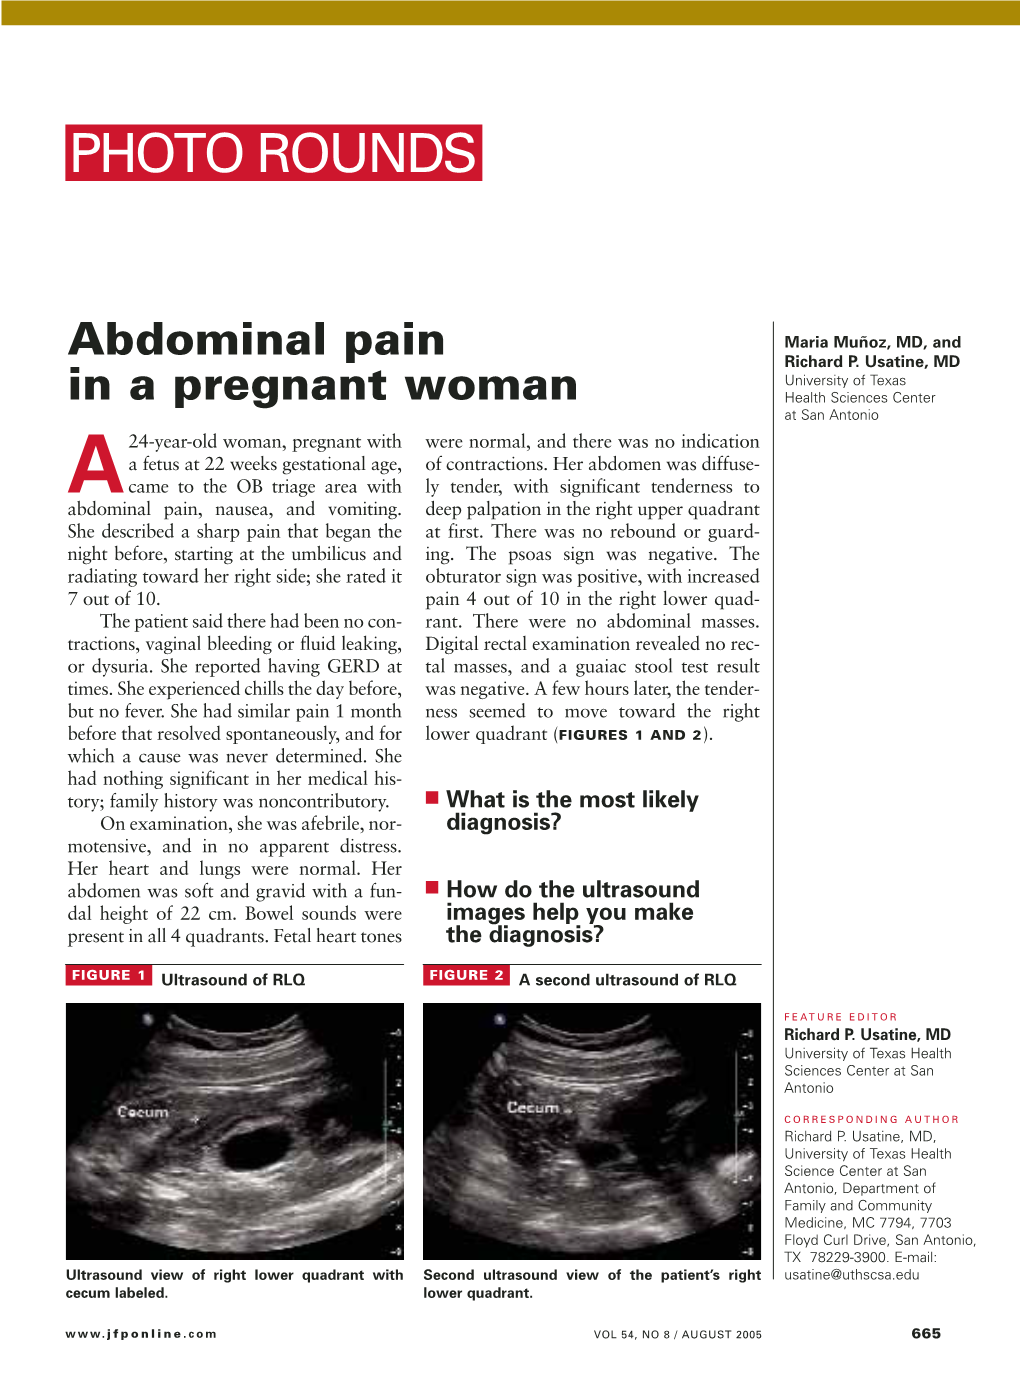 Abdominal Pain in a Pregnant Woman ▲